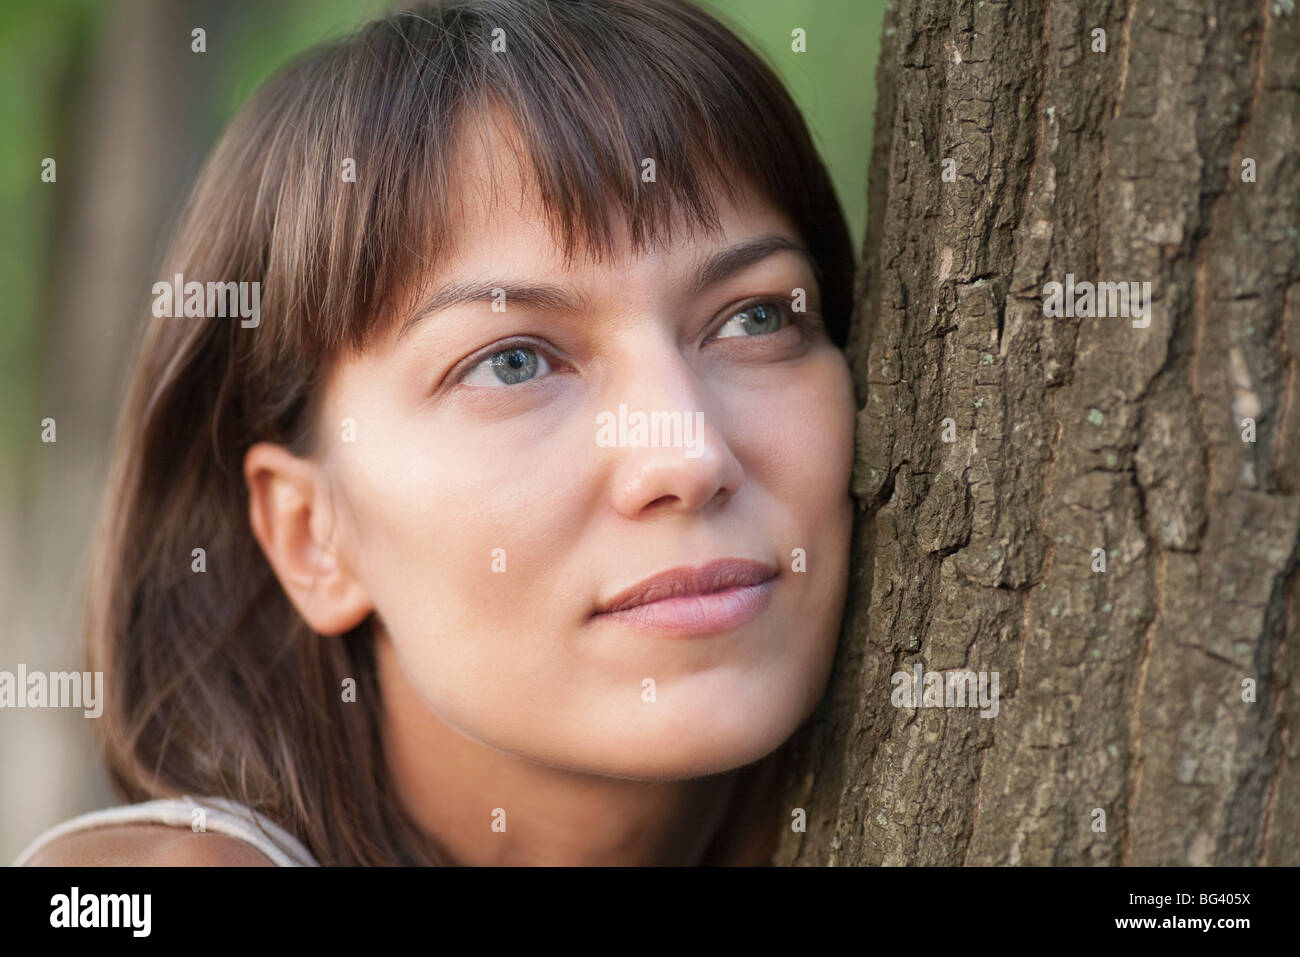 Woman leans on tree trunk with a faraway look in her eyes Stock Photo